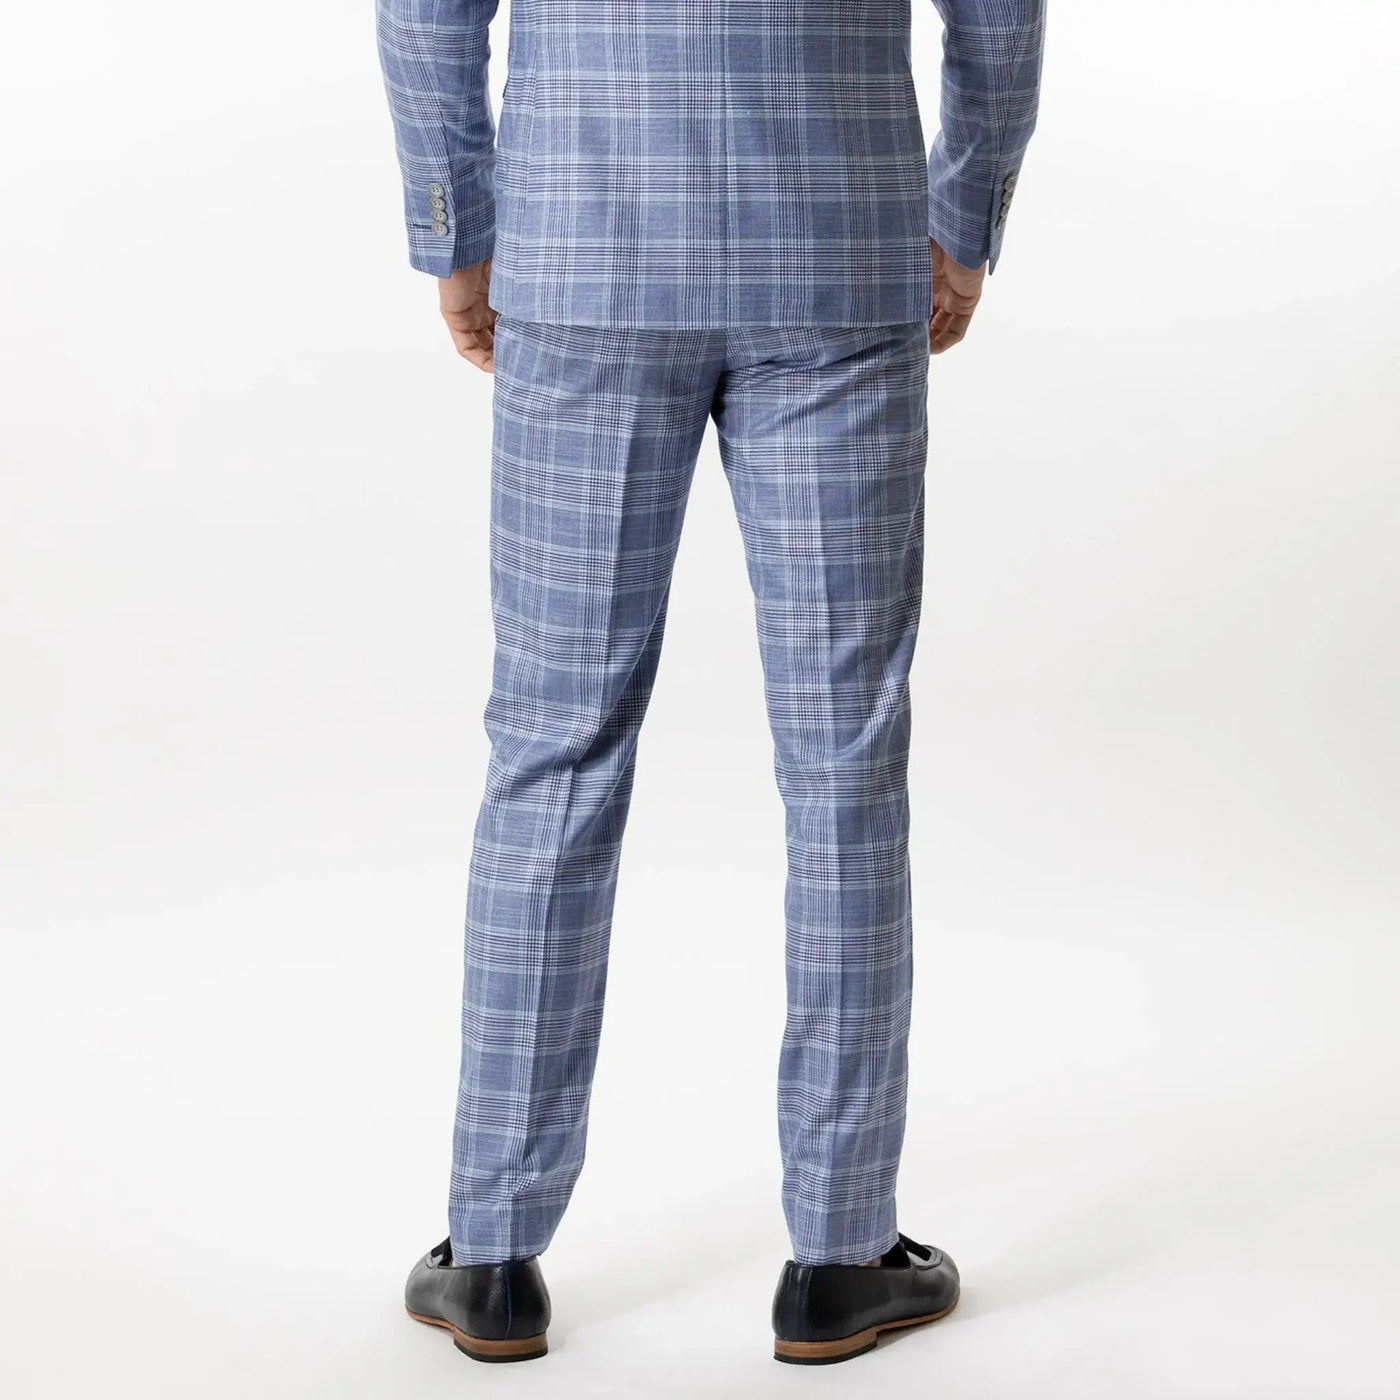 Lodevole Mens Slim Fit Trousers Blue And White Plaid Back View